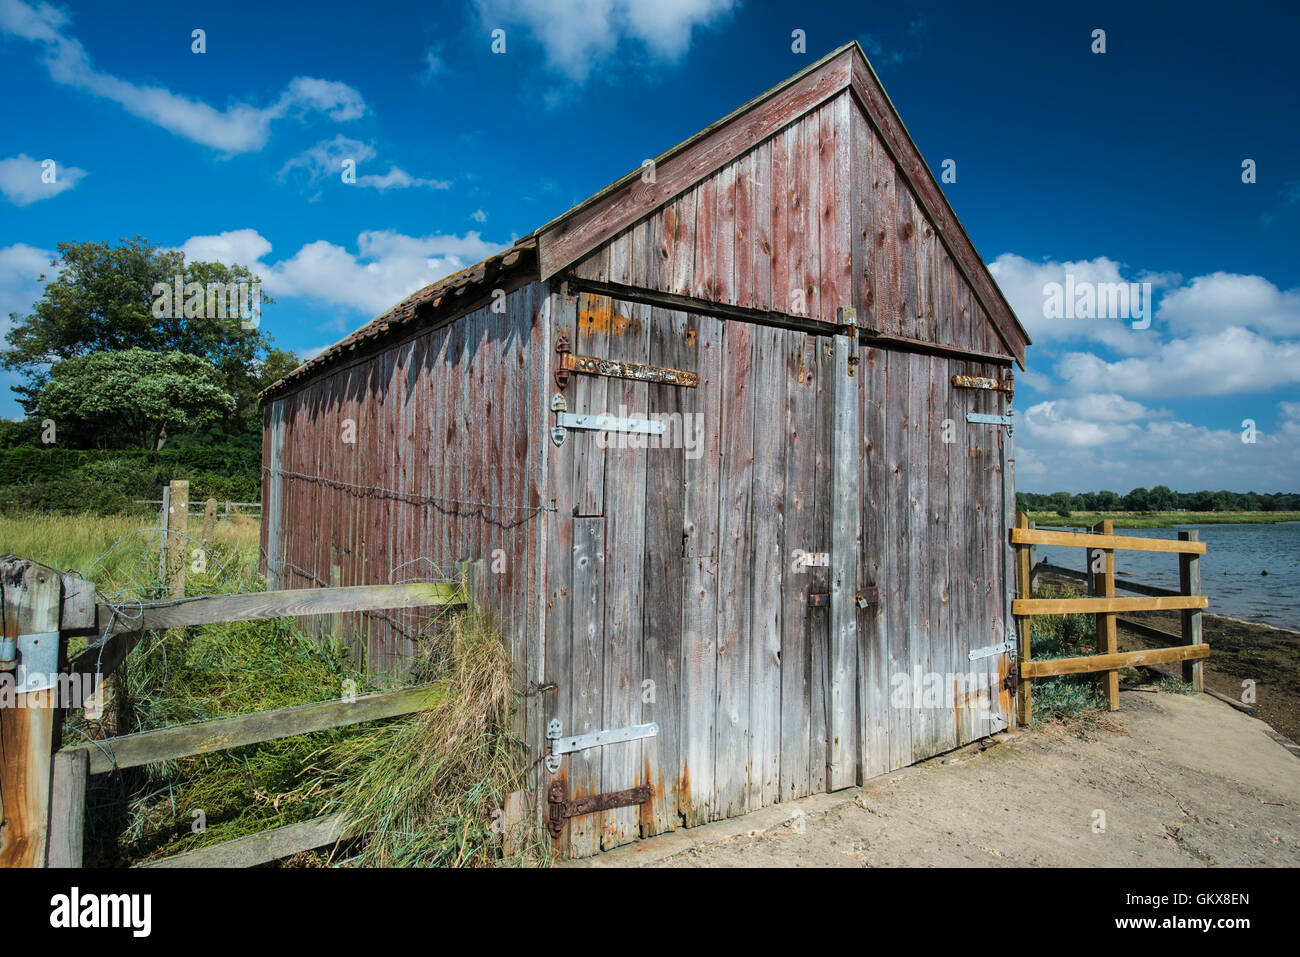 Old wooden boathouse on the edge of a waterway Stock Photo